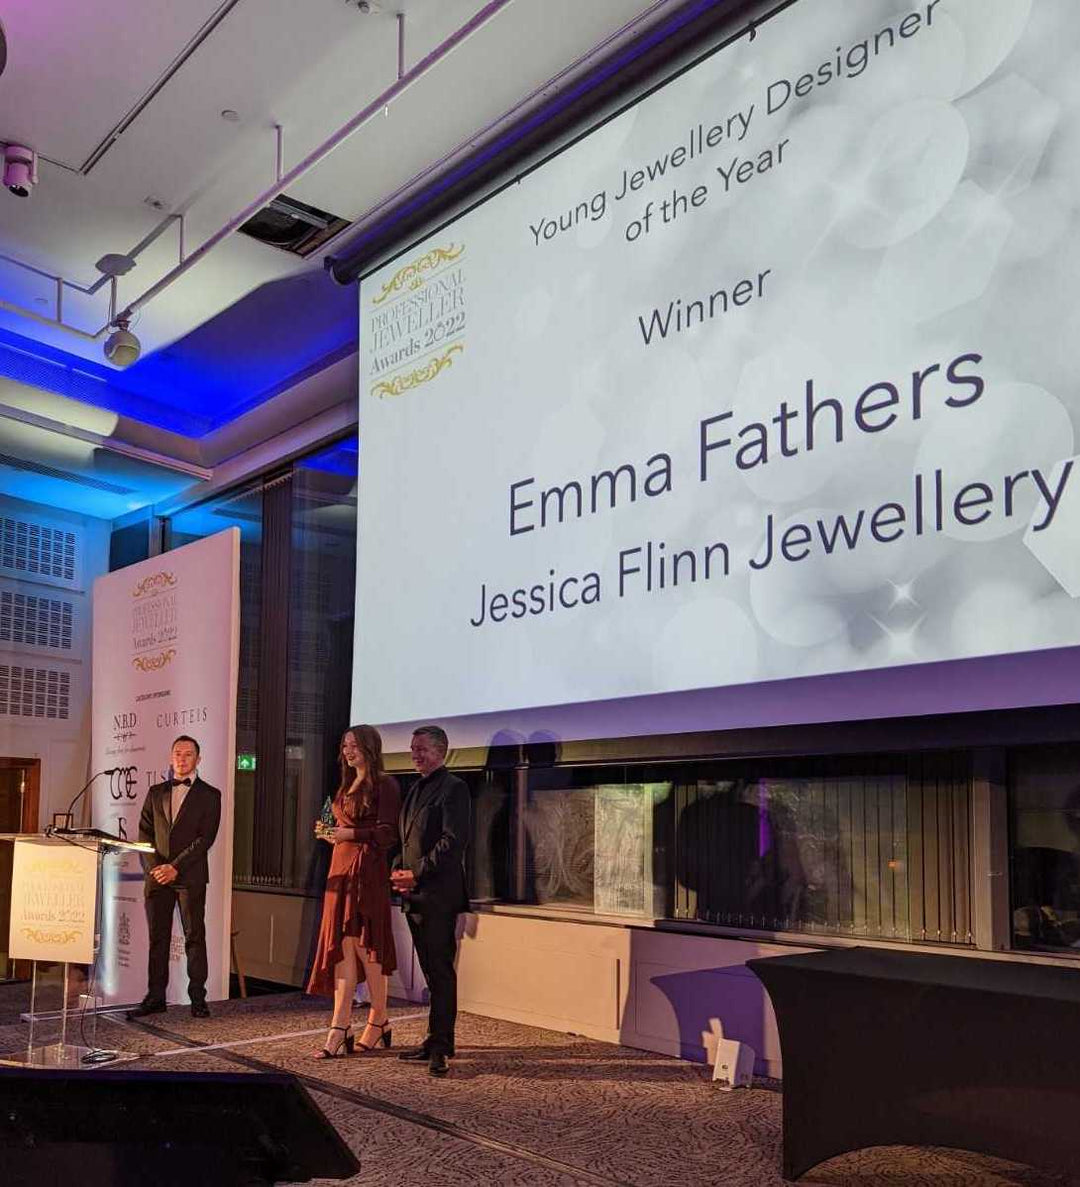 Emma Fathers Wins 'Young Jewellery Designer Of The Year'